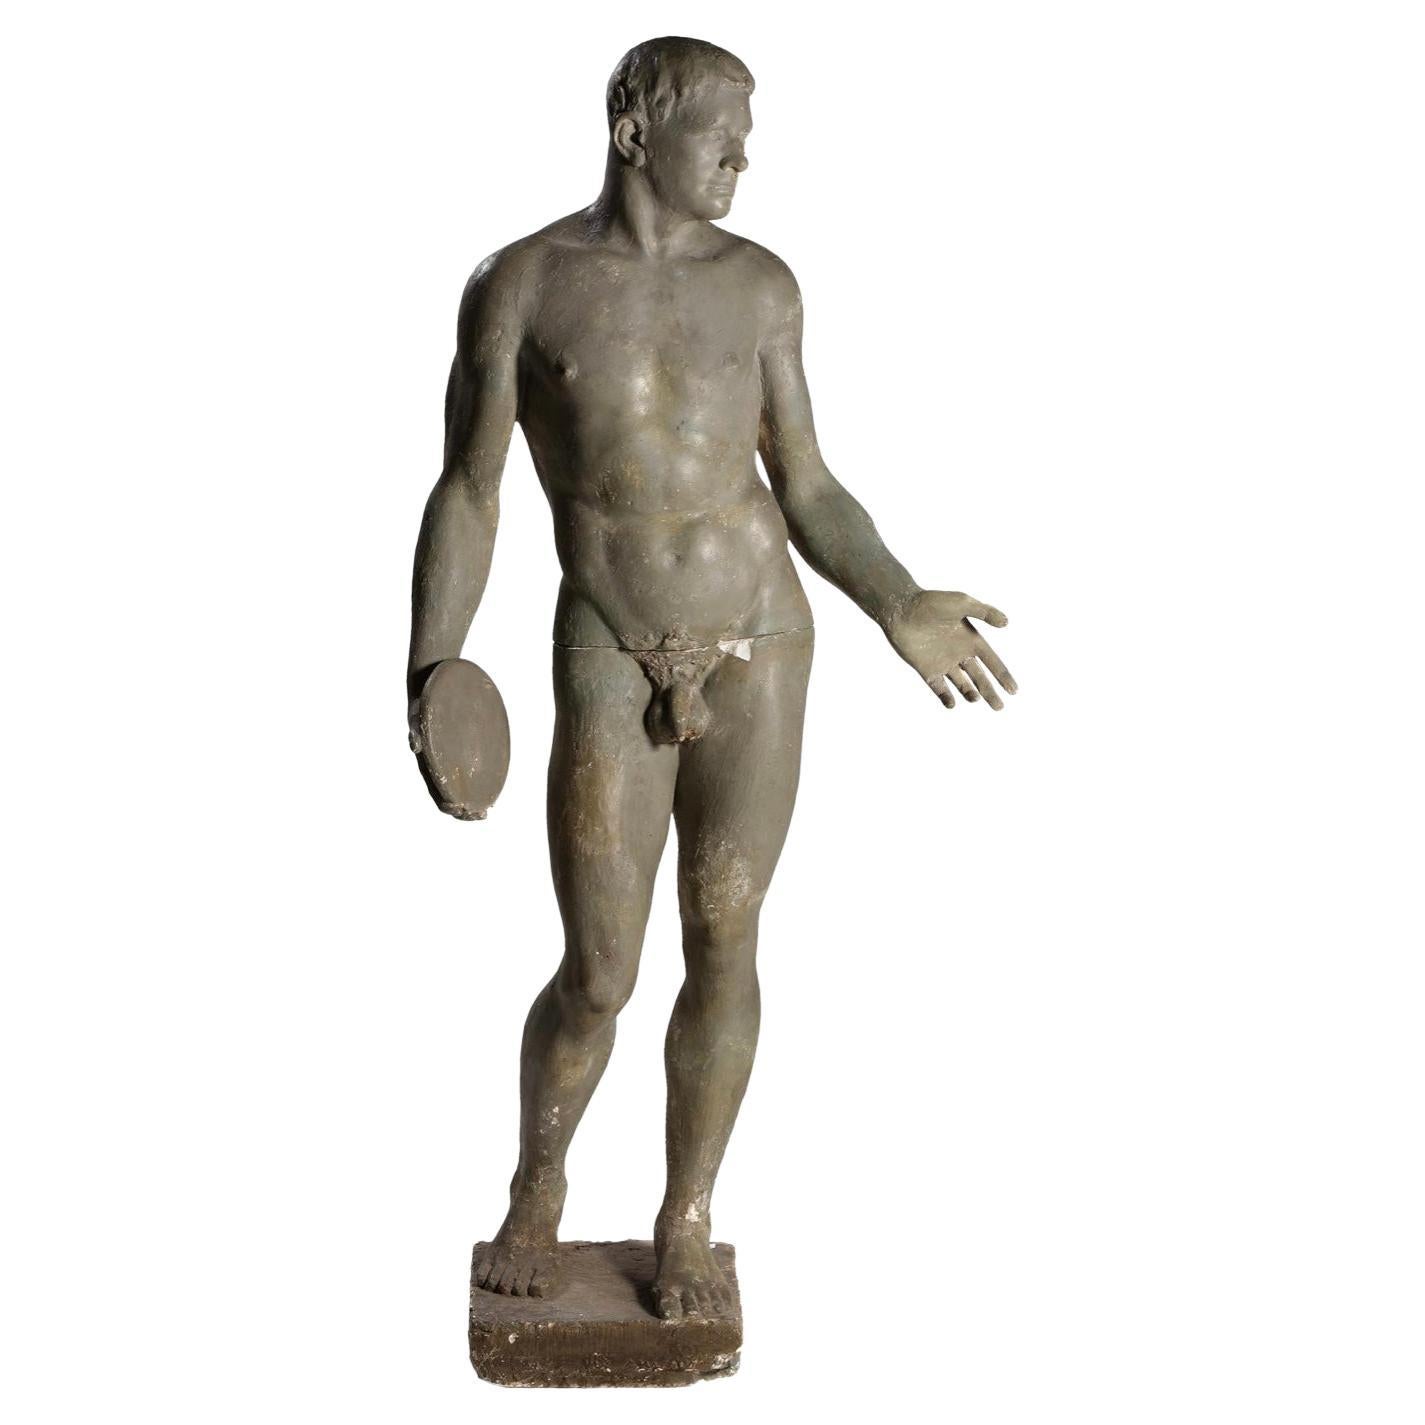 Early 20th Century Life-Size Plaster Statue Attributed to Jean Rene Gauguin